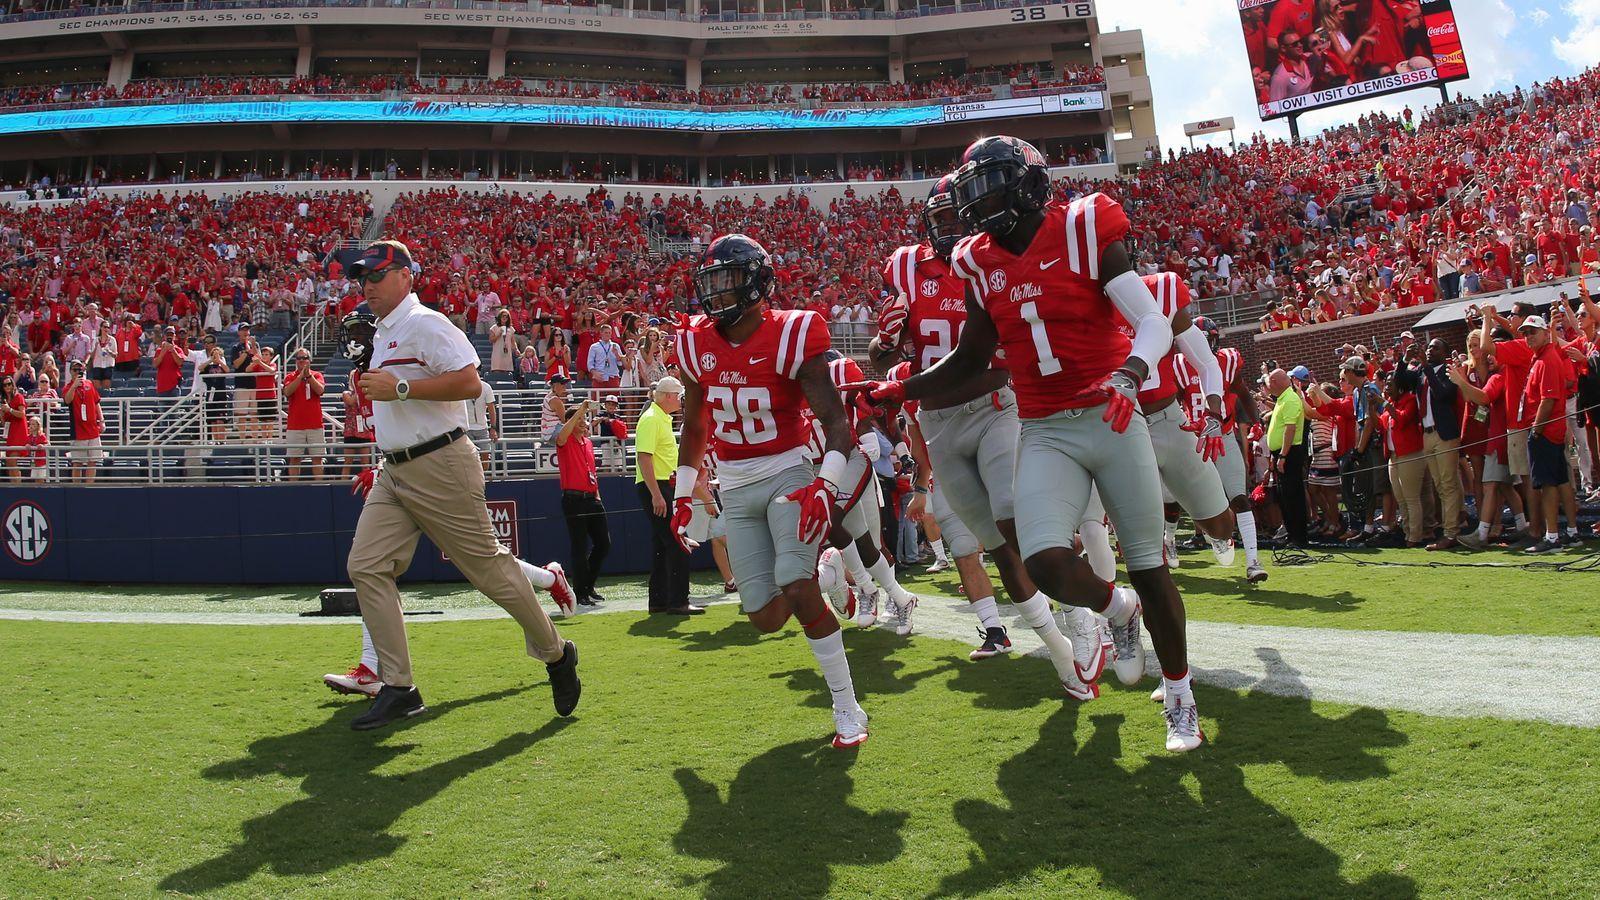 Where will Ole Miss football be in 5 years? An absurd question